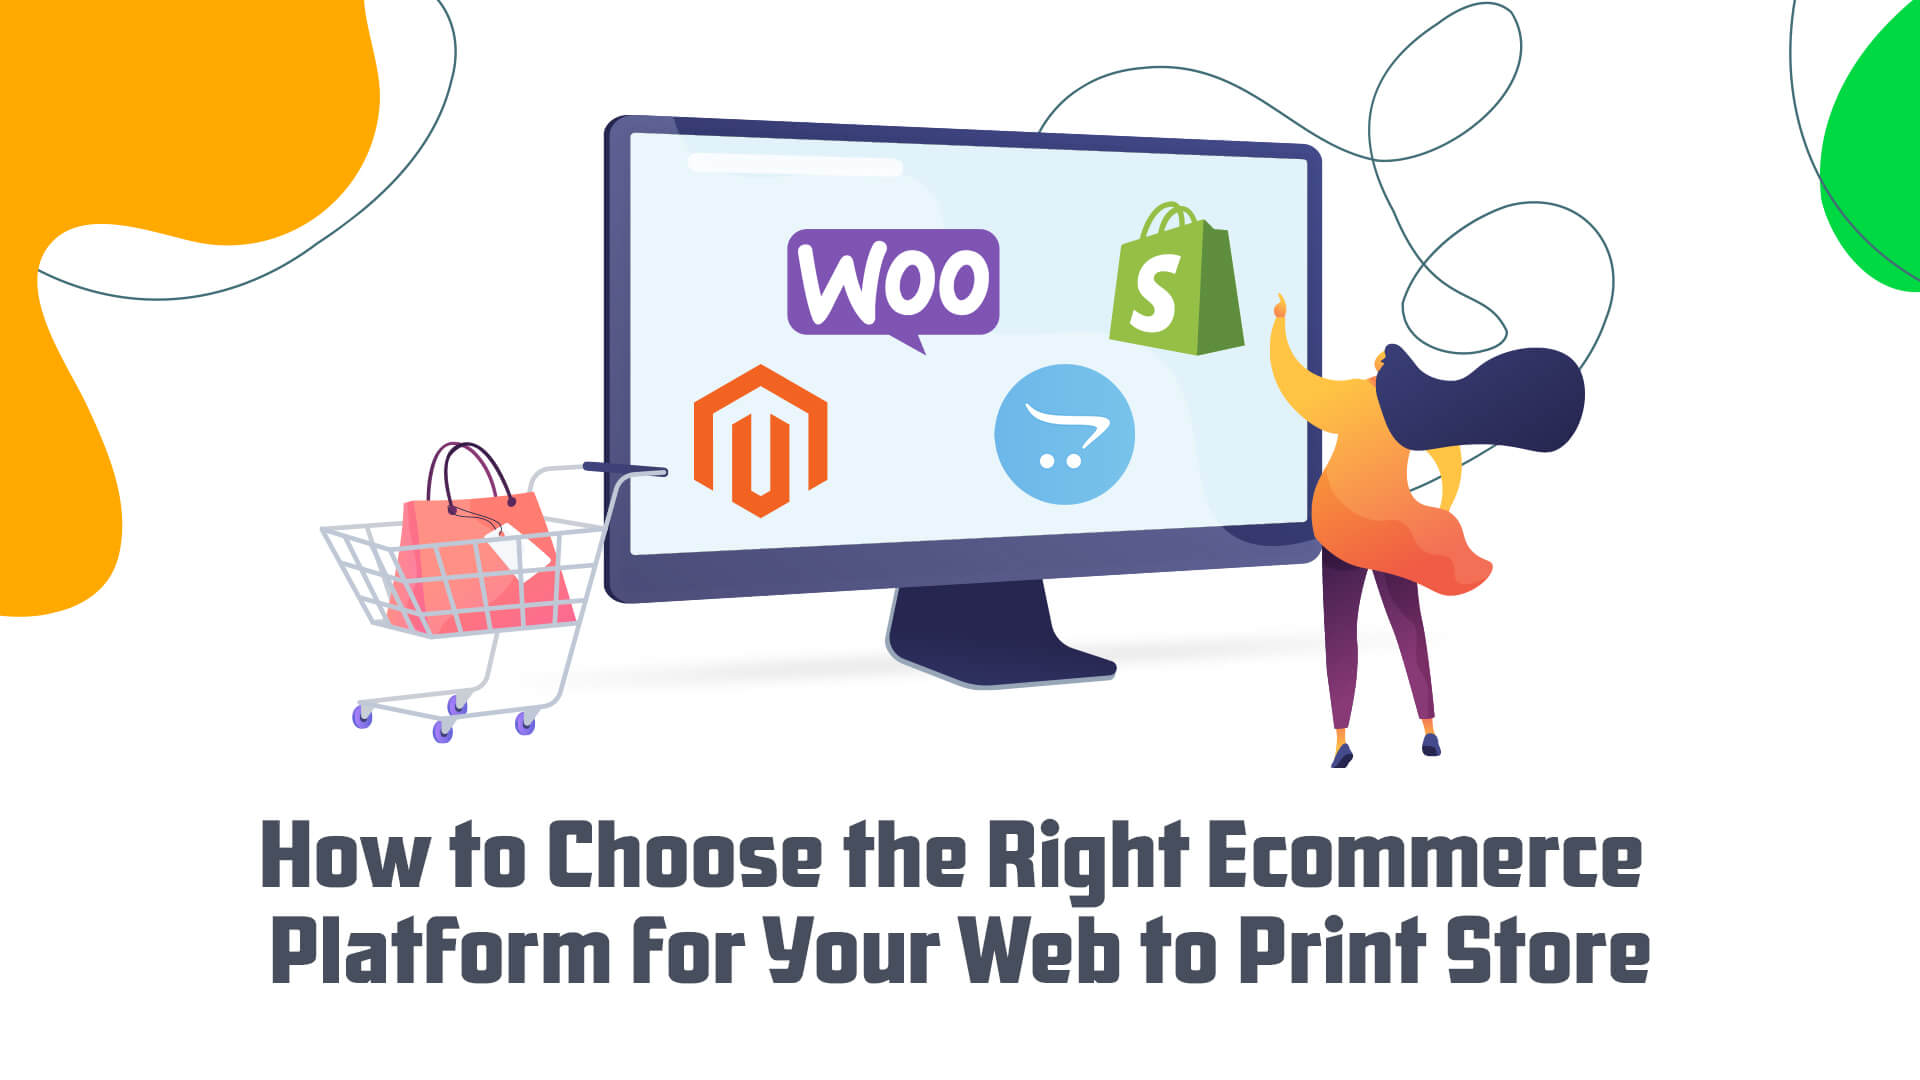 How to Choose the Right Ecommerce Platfrom for Web to Print